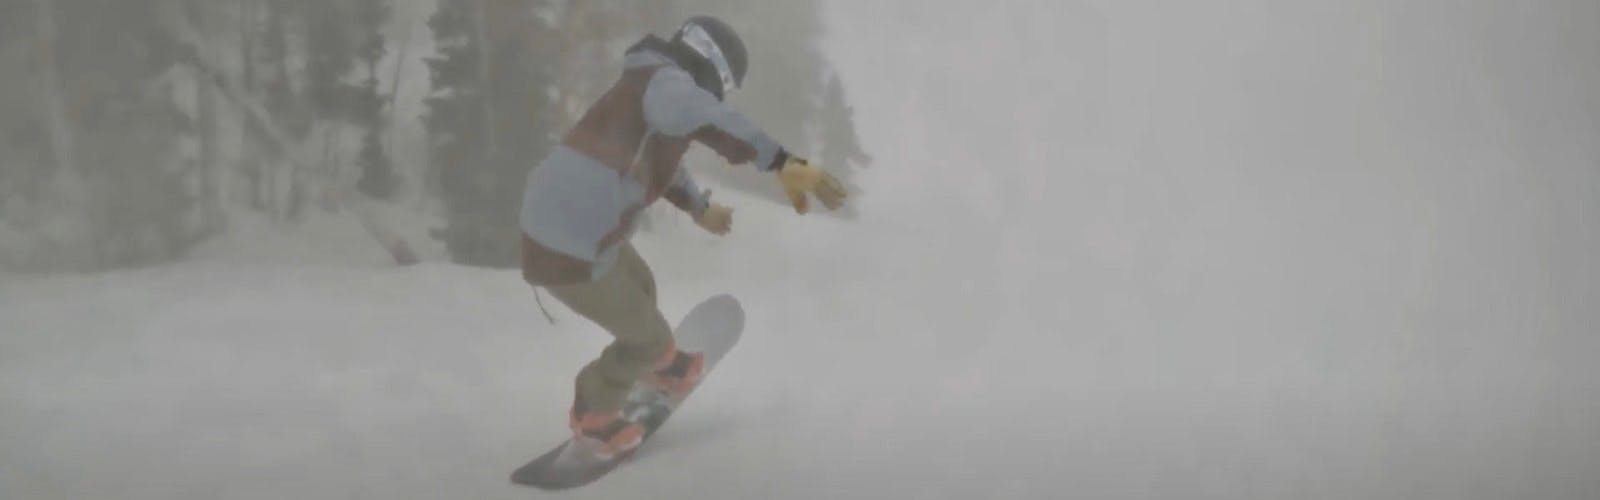 Buttering with the Nitro Drop snowboard in thick fog